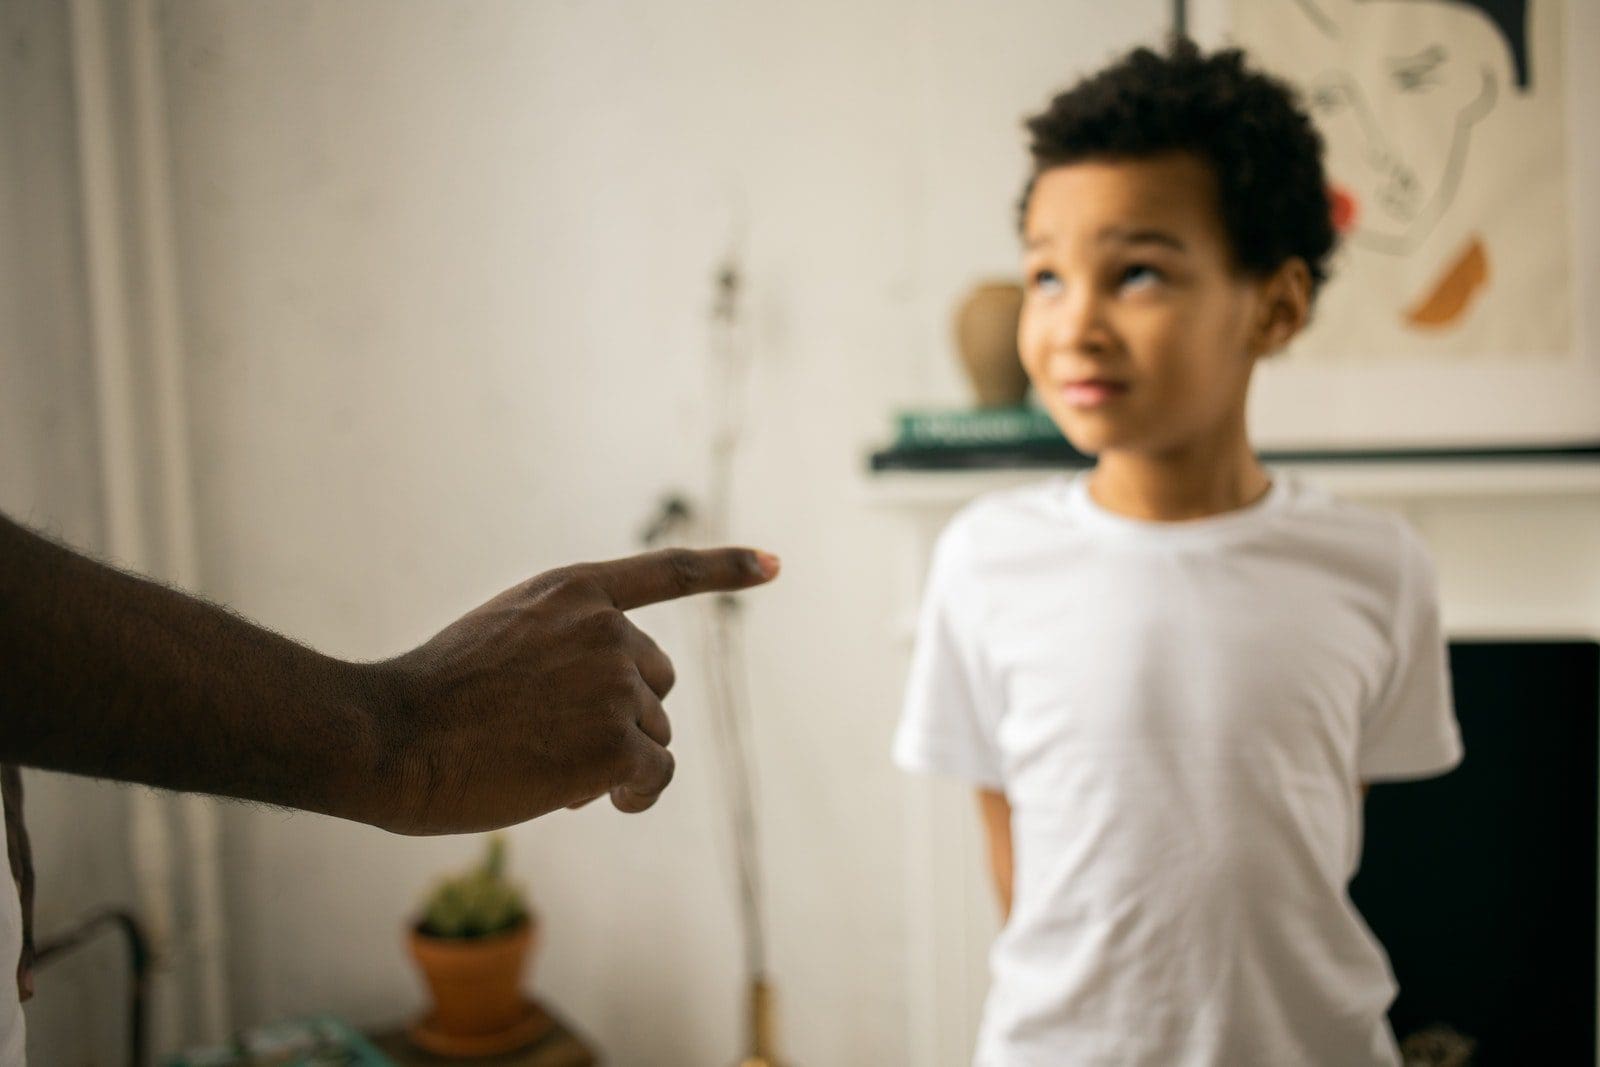 guilt and shame Upset little ethic boy looking at faceless father during argument